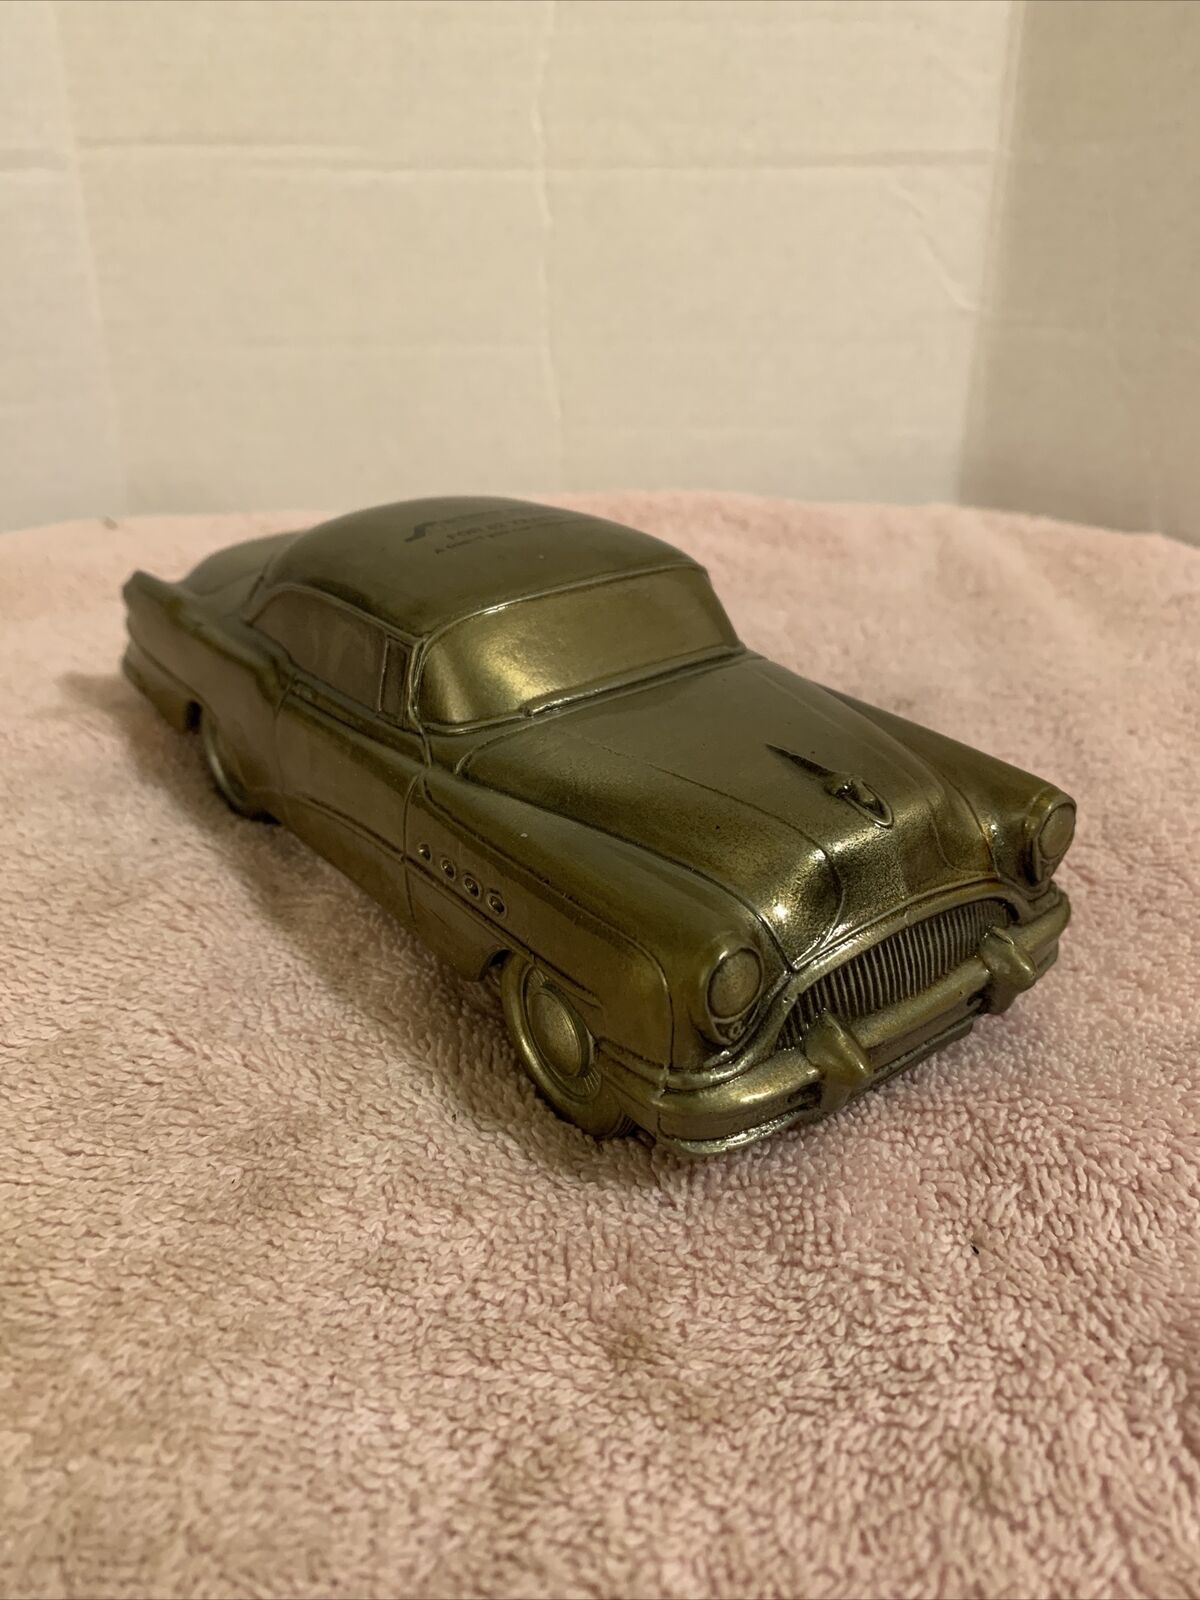 State Auto Diecast Promotional Buick Car Bank Brass Tone